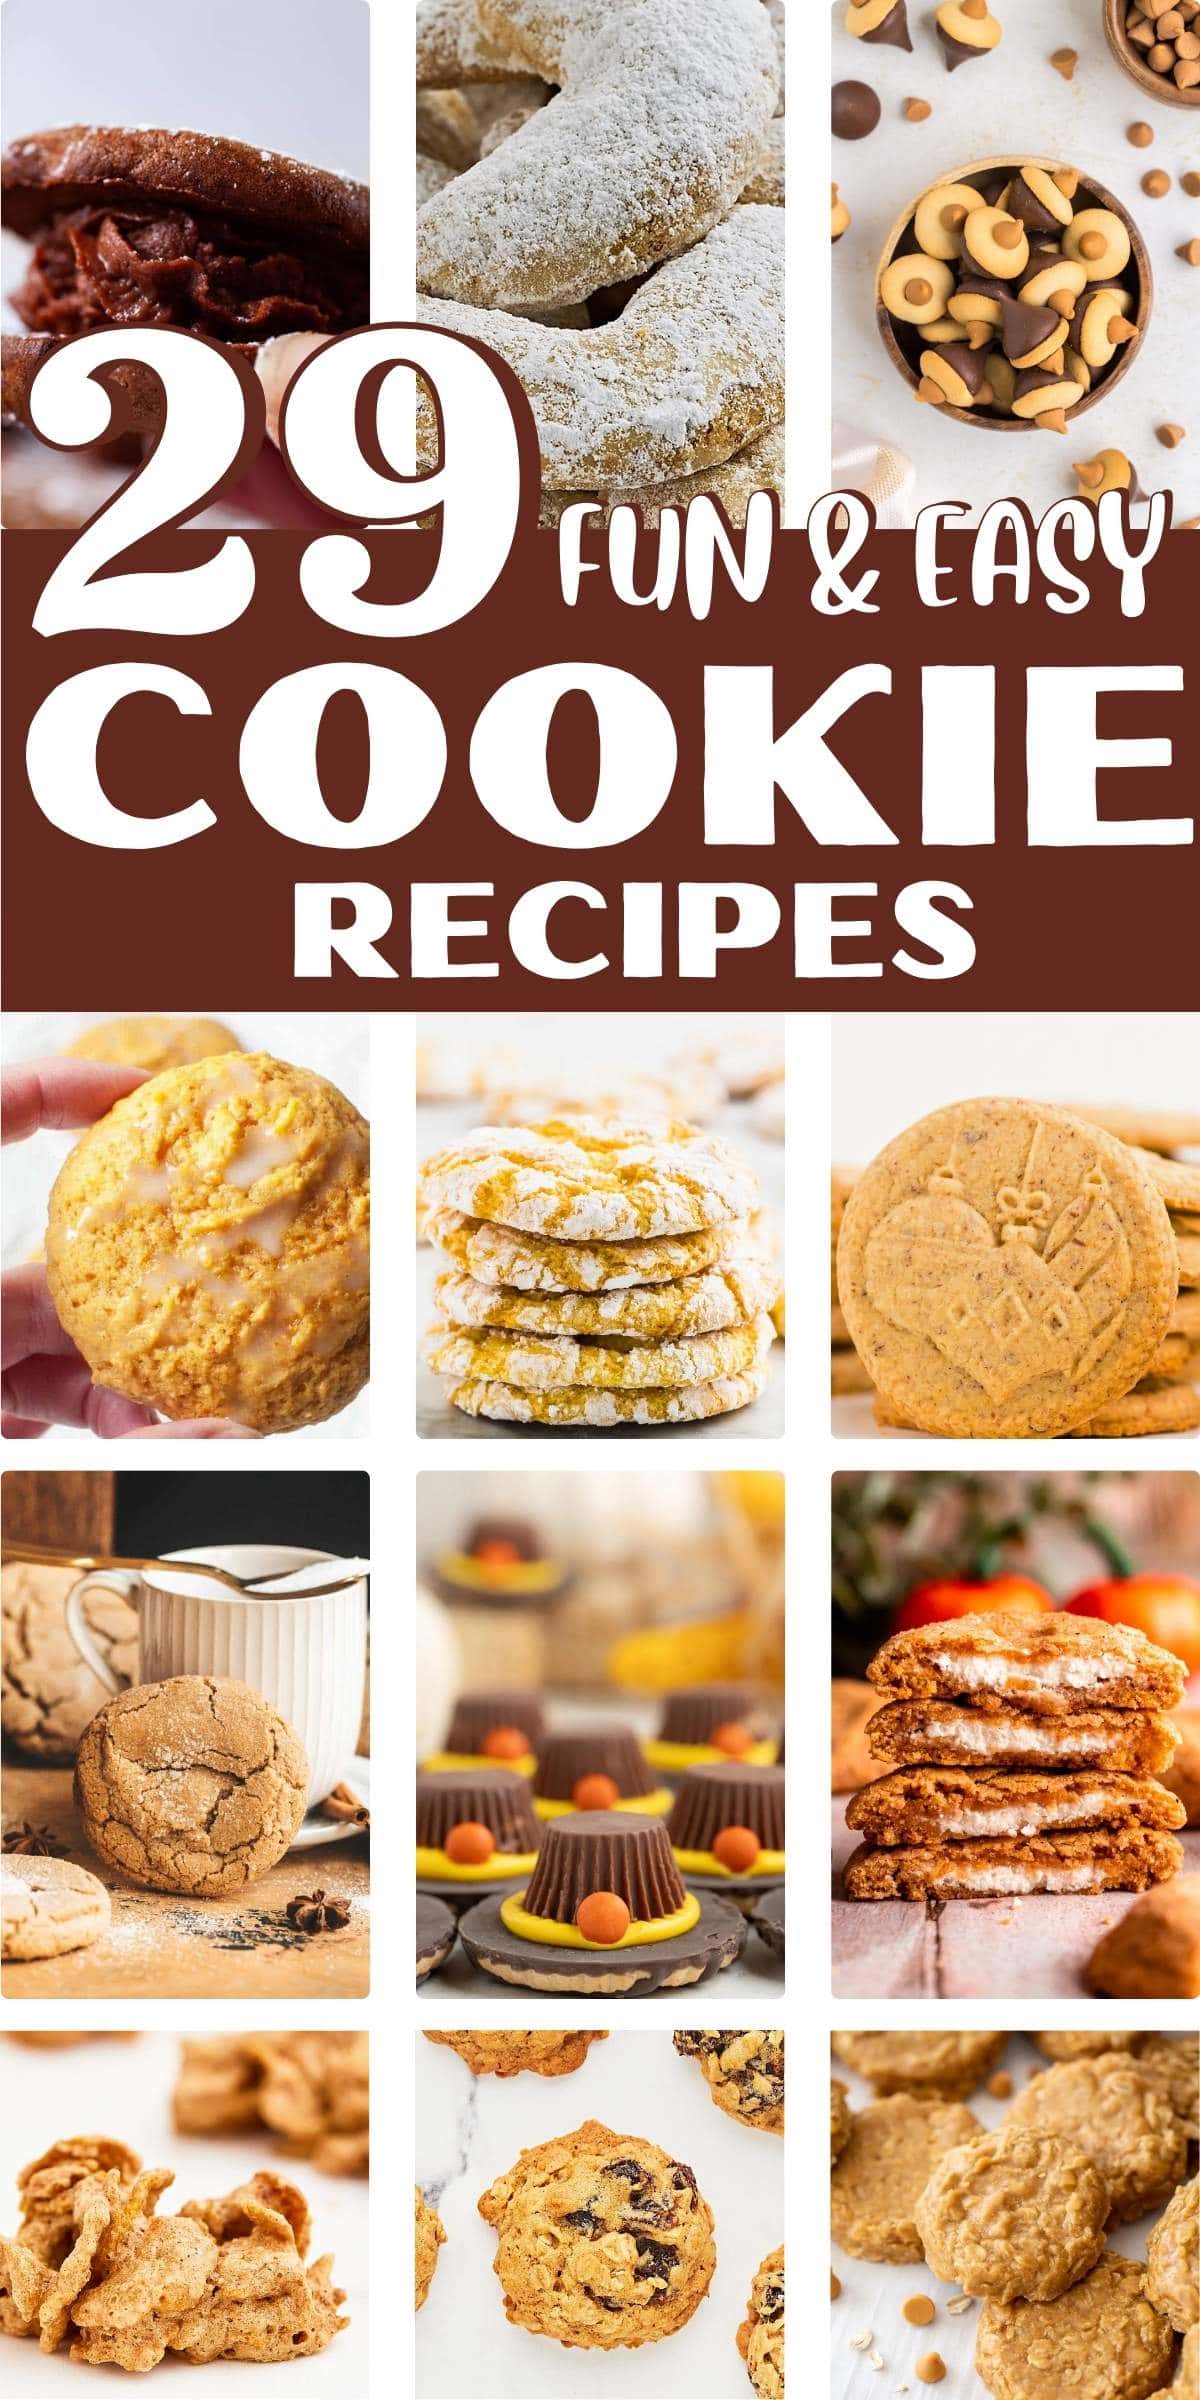 🍪 Fall in Love with Baking Again! 🍂 Discover 29 unforgettable fall cookie recipes that will make you the star of any gathering. From cozy classics to showstopping treats, this lineup has something for everyone. Click to unveil the 'showstopper' cookie that's taking the internet by storm! #CheerfulCook #FallCookies #CookieRecipes #Baking #ShowstopperCookie ♡ cheerfulcook.com via @cheerfulcook